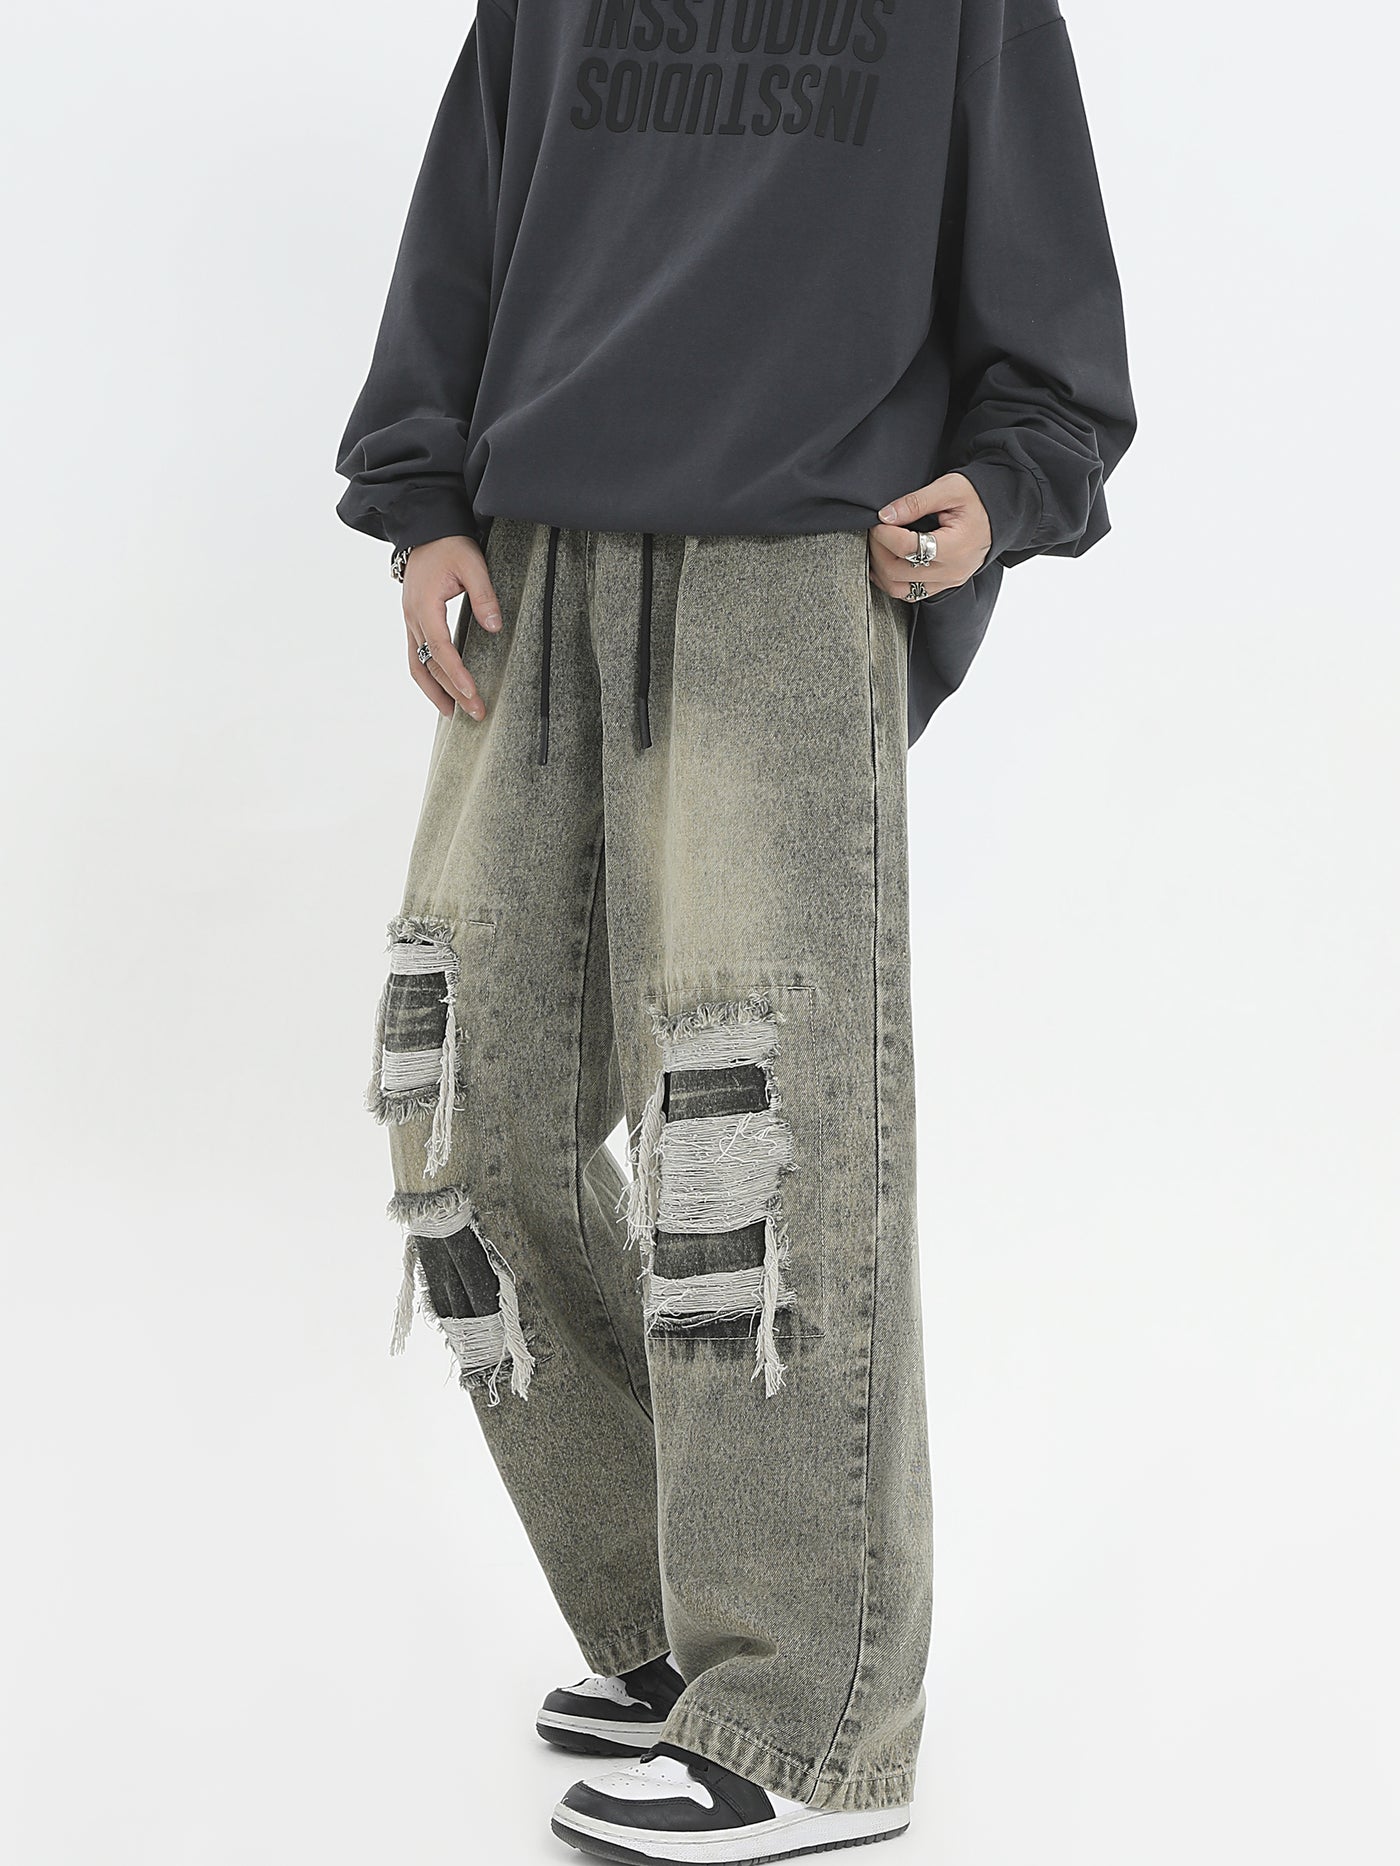 [INSstudios] style ripped patch wash water jeans na822 